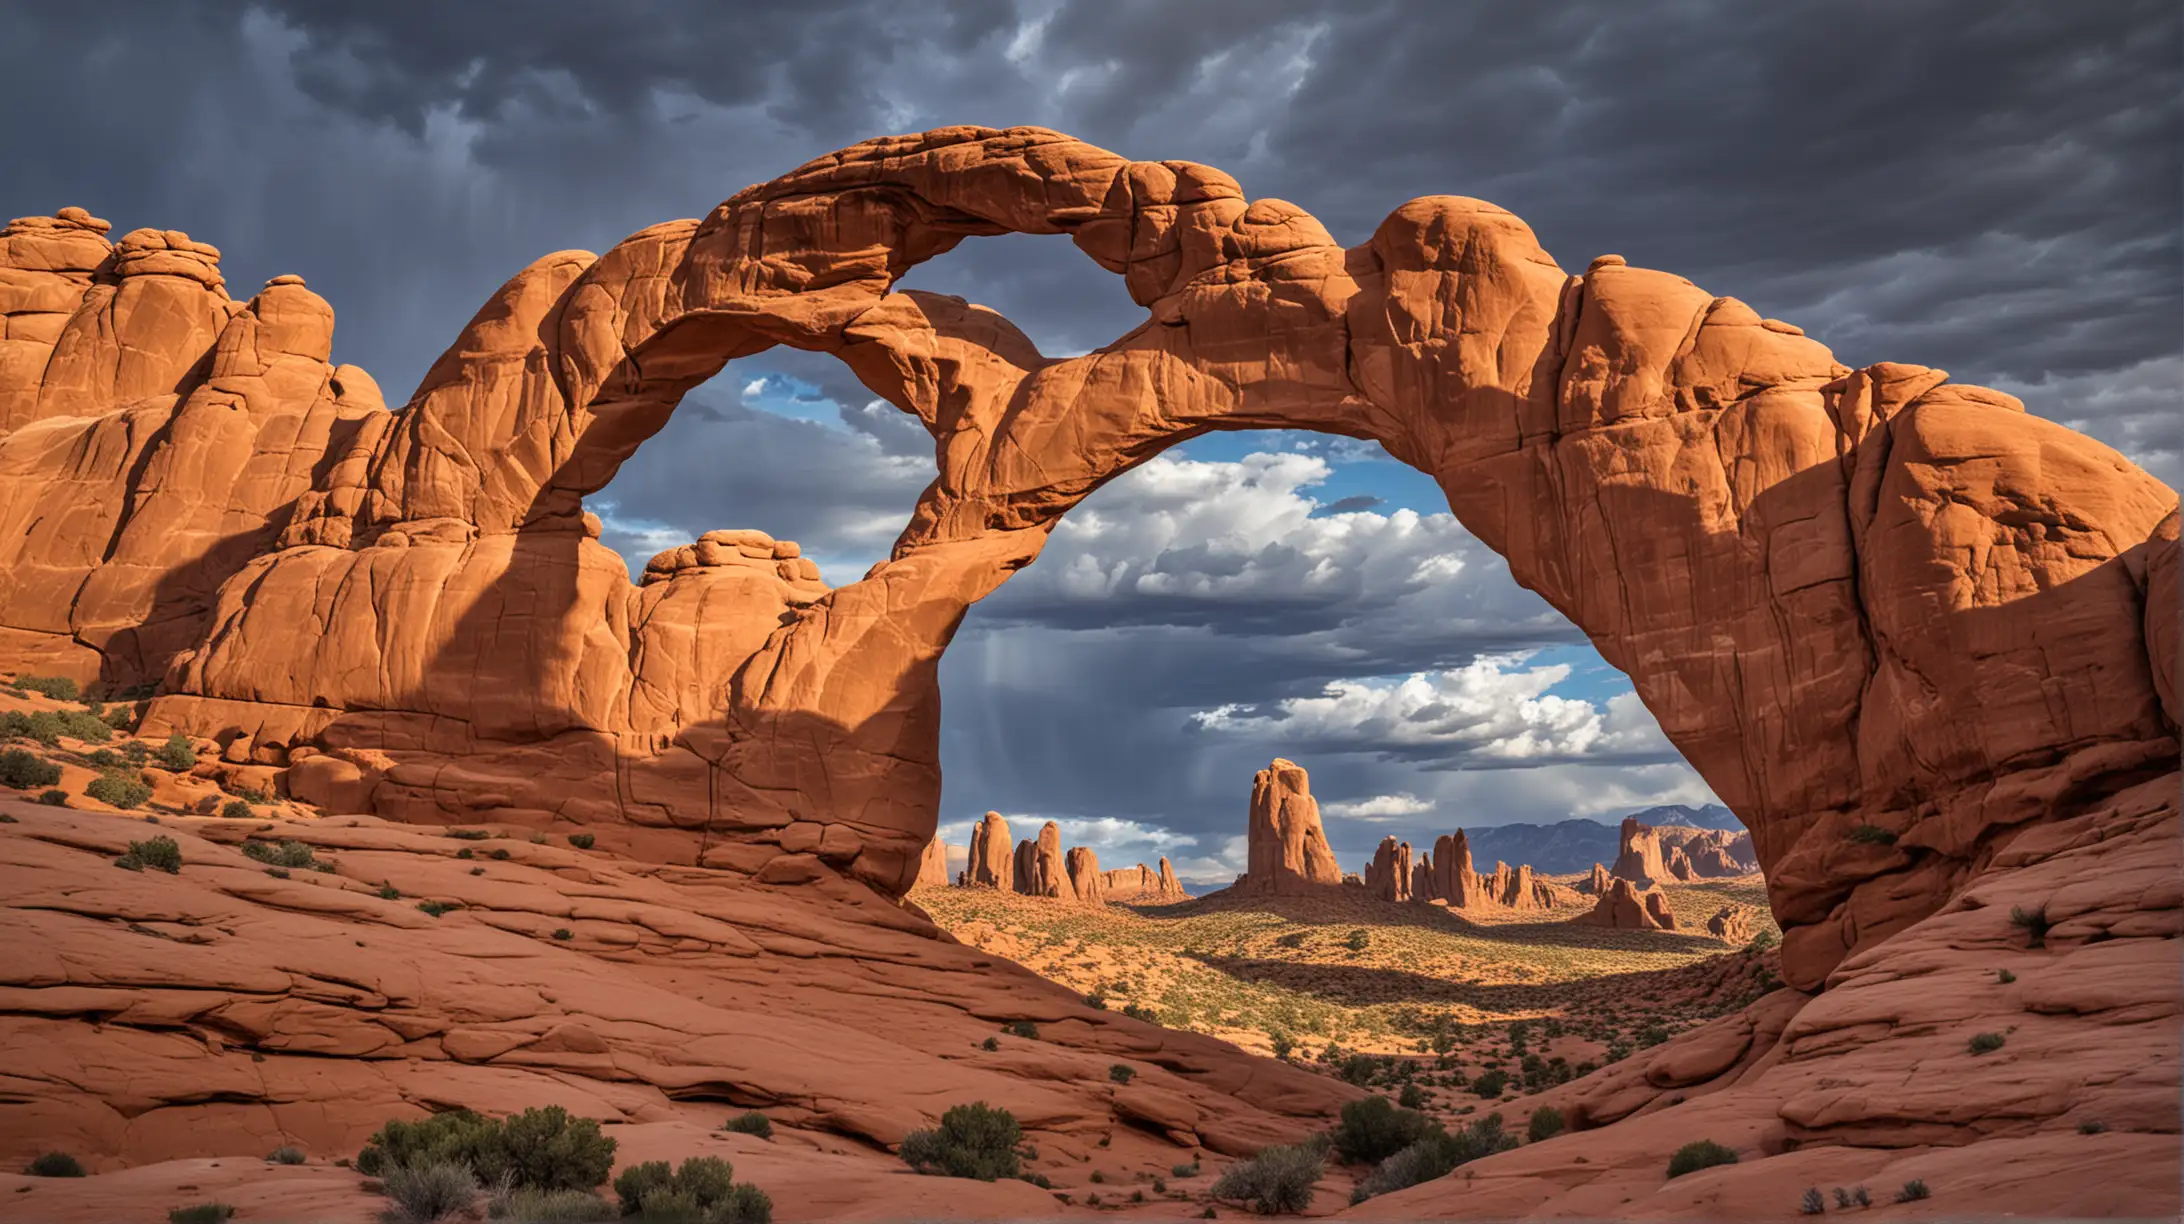 Skyline Arch in Arches National Park, late afternoon, dramatic sky, warm light.